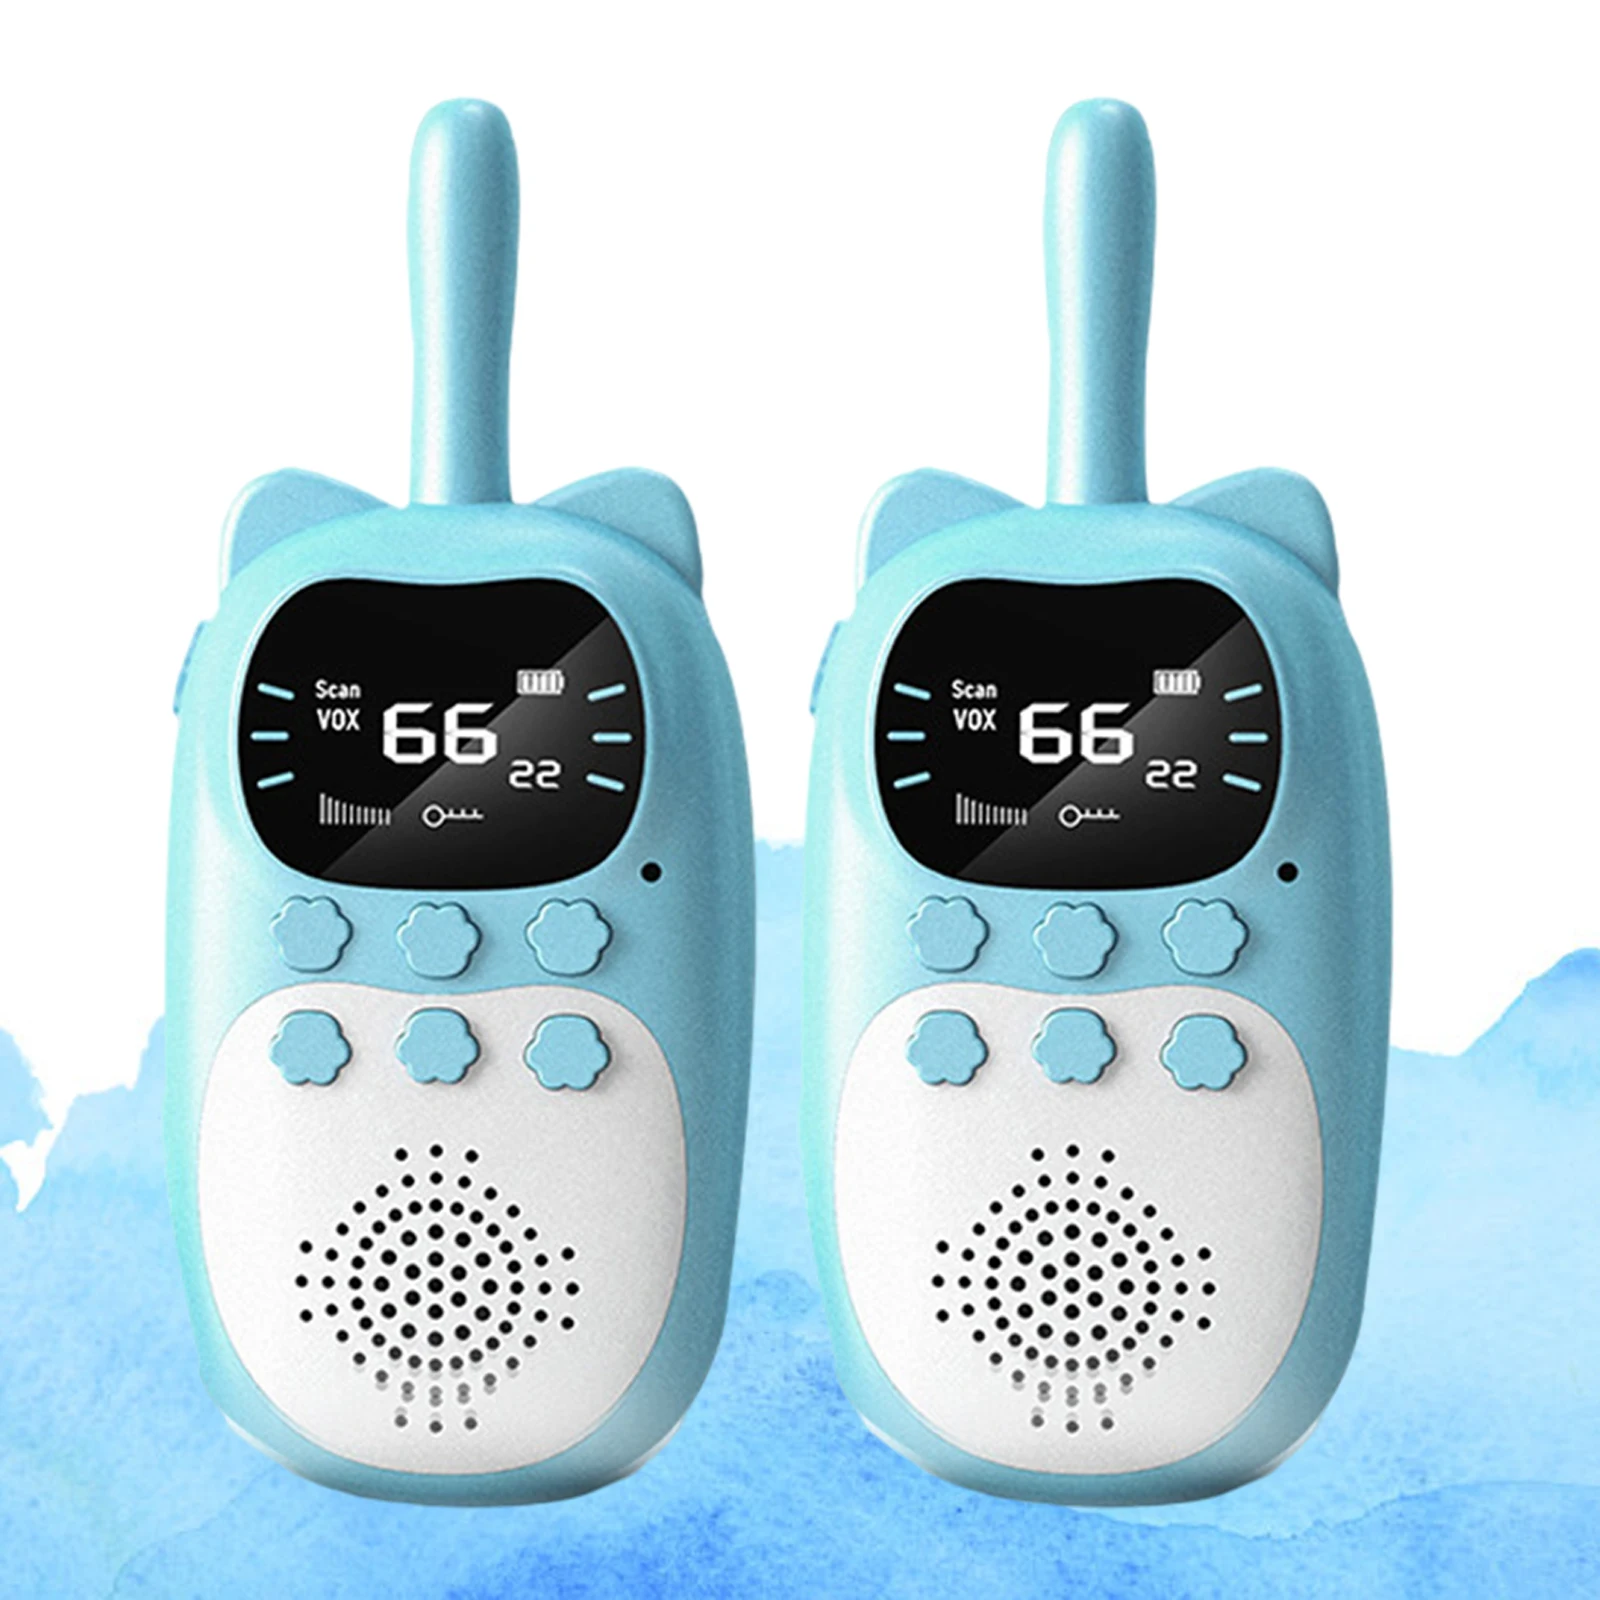 Plastic Wearable Kids Walkie Talkies LCD Toys Gifts for Children Fishing